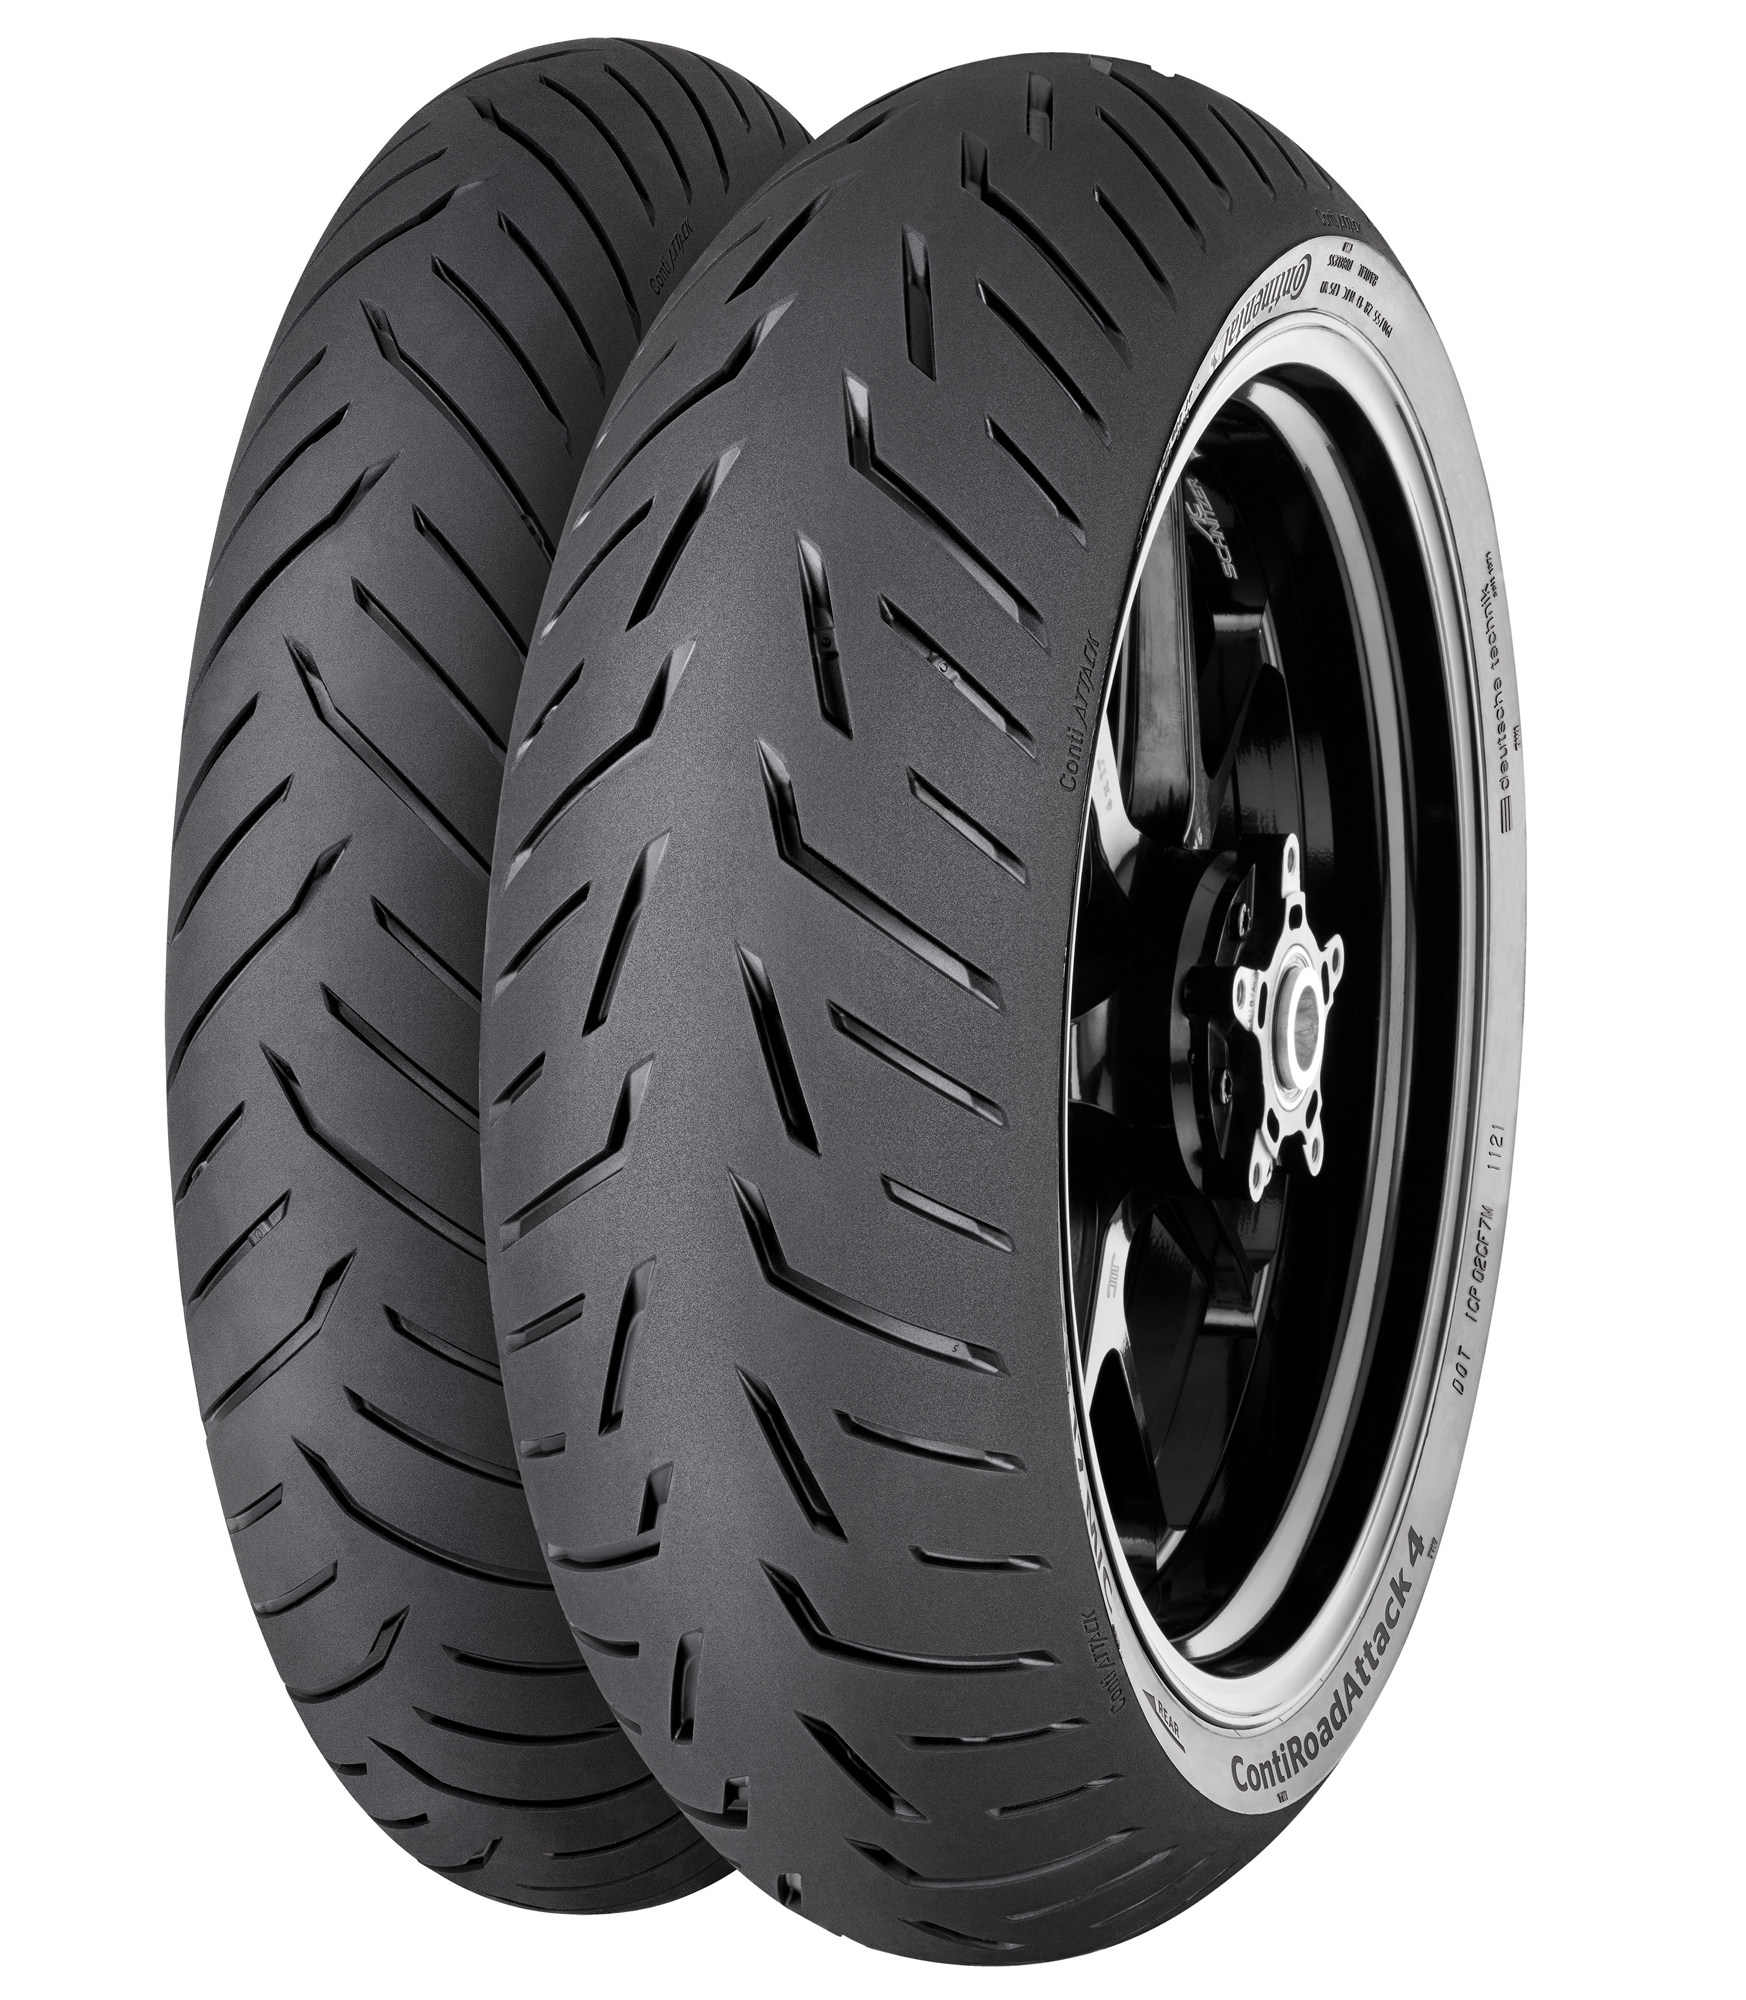 Continental ContiRoad Attack 4 Street / Sport Touring Tire